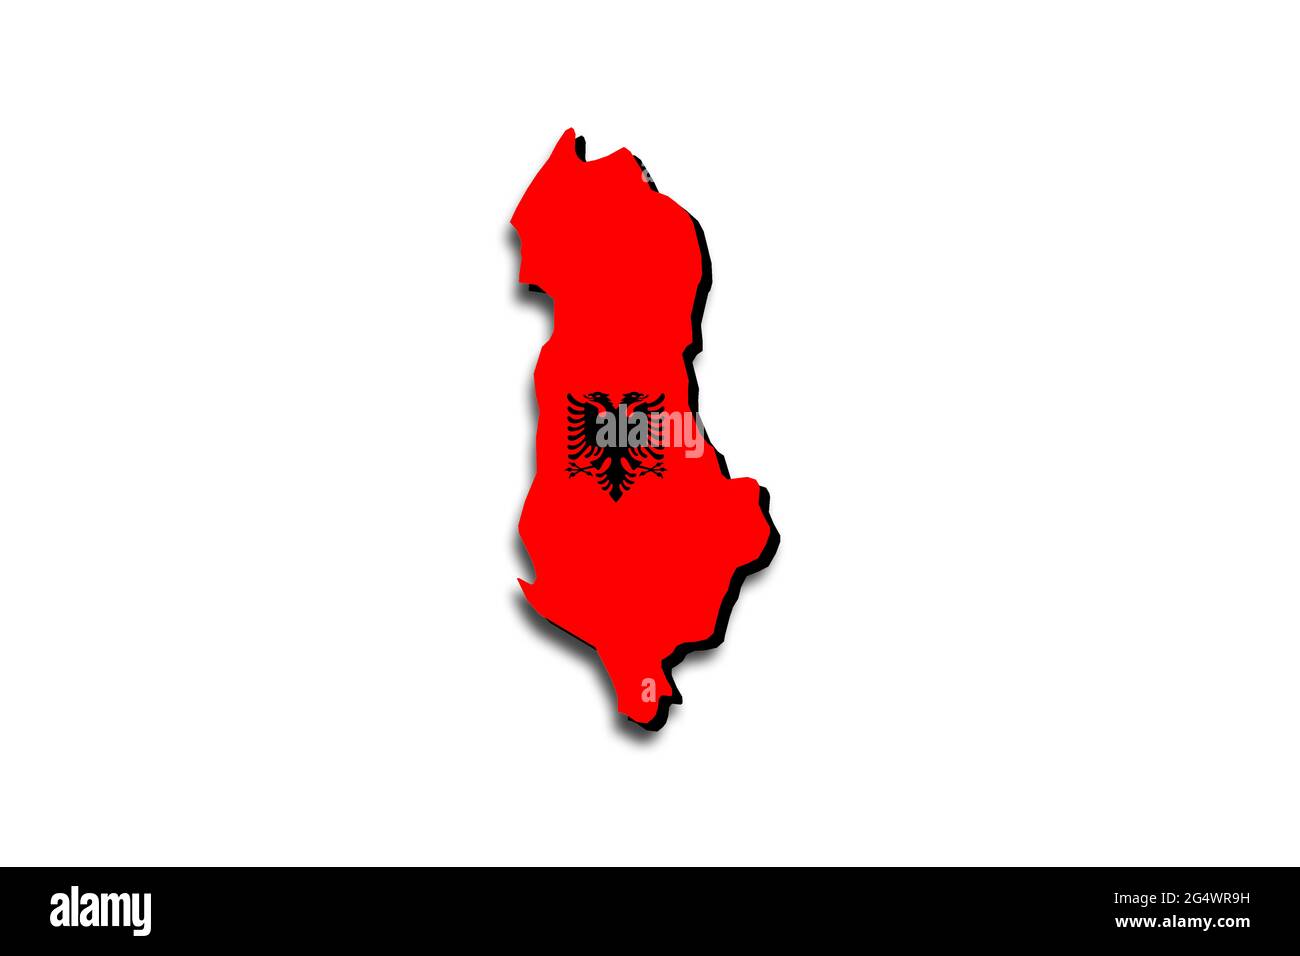 Outline map of Albania with the national flag superimposed over the country. 3D graphics casting a shadow on the white background Stock Photo